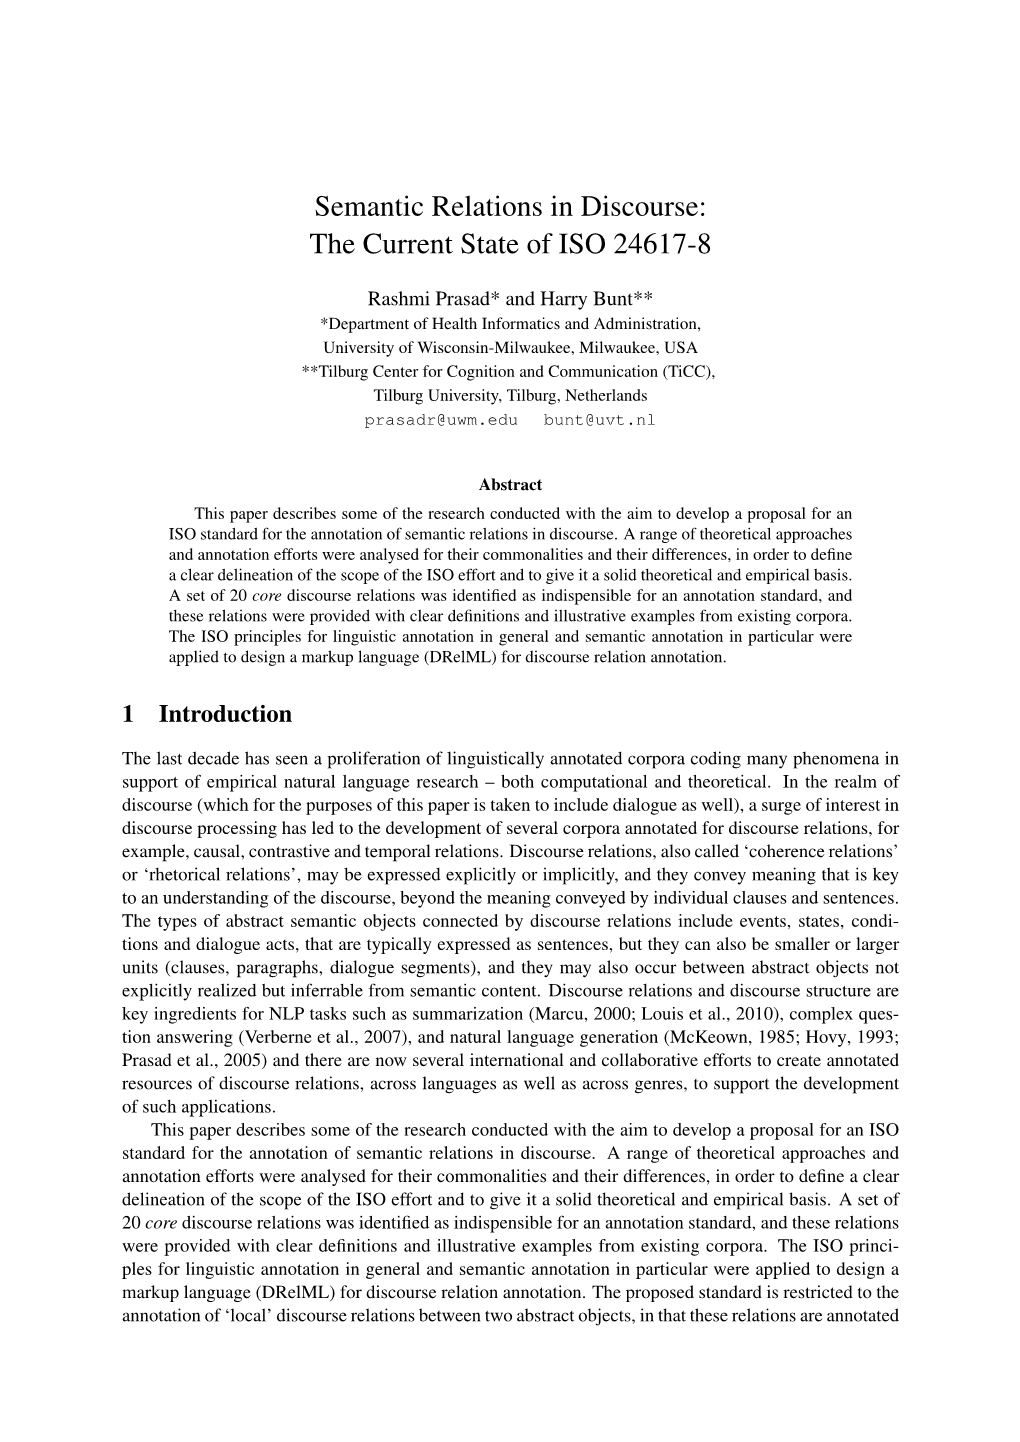 Semantic Relations in Discourse: the Current State of ISO 24617-8